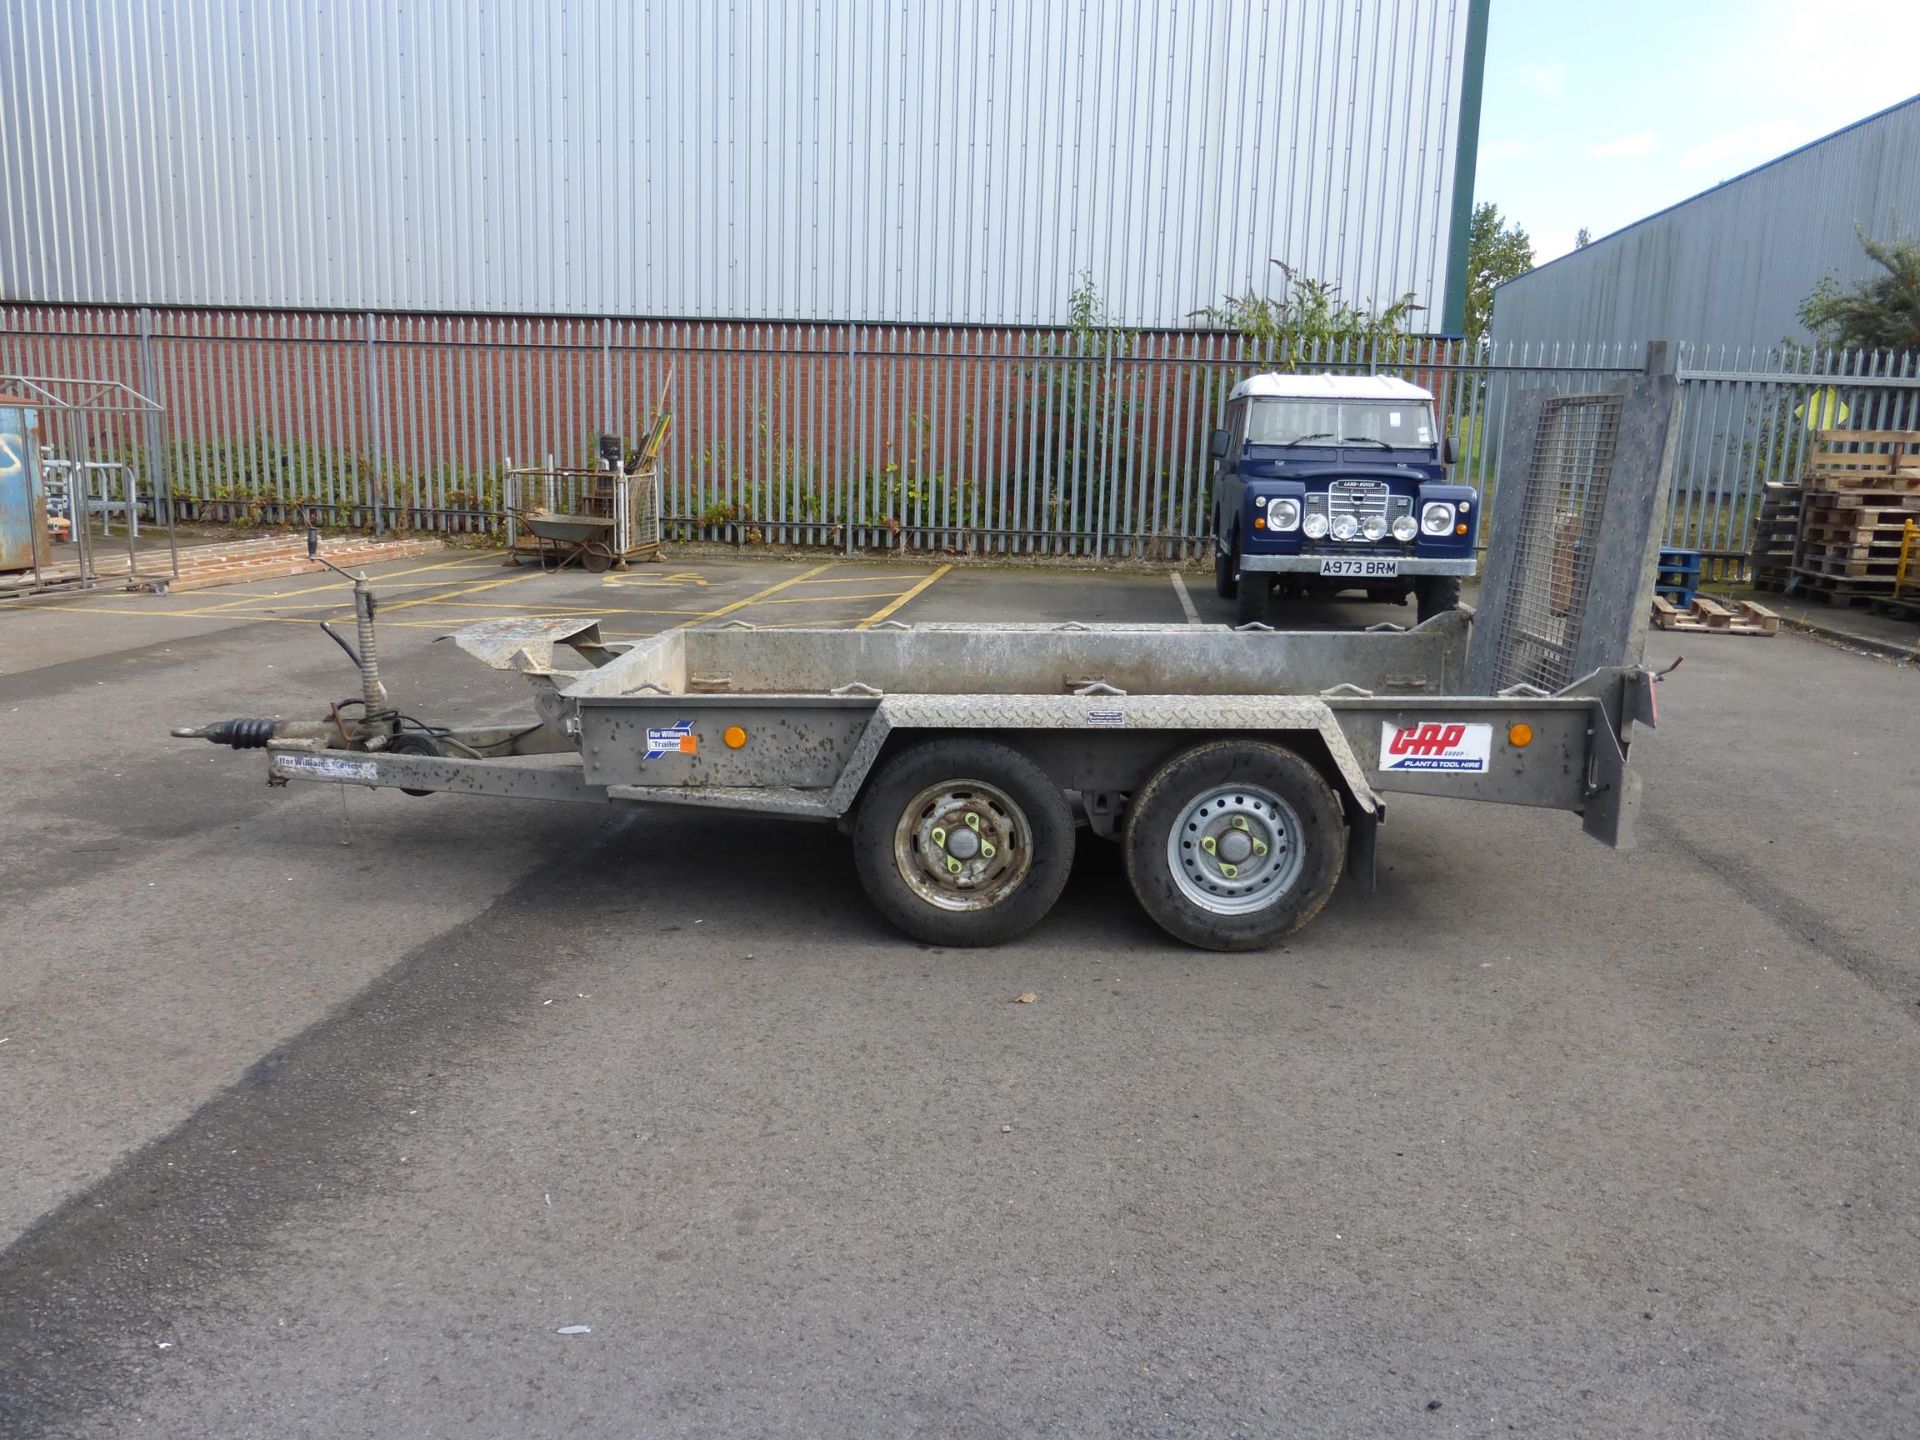 Ifor Williams 2013 Type DB56 GH94 Galvanised Twin Axle Plant Trailer. Vin No: SCK600000C0619020, - Image 3 of 10